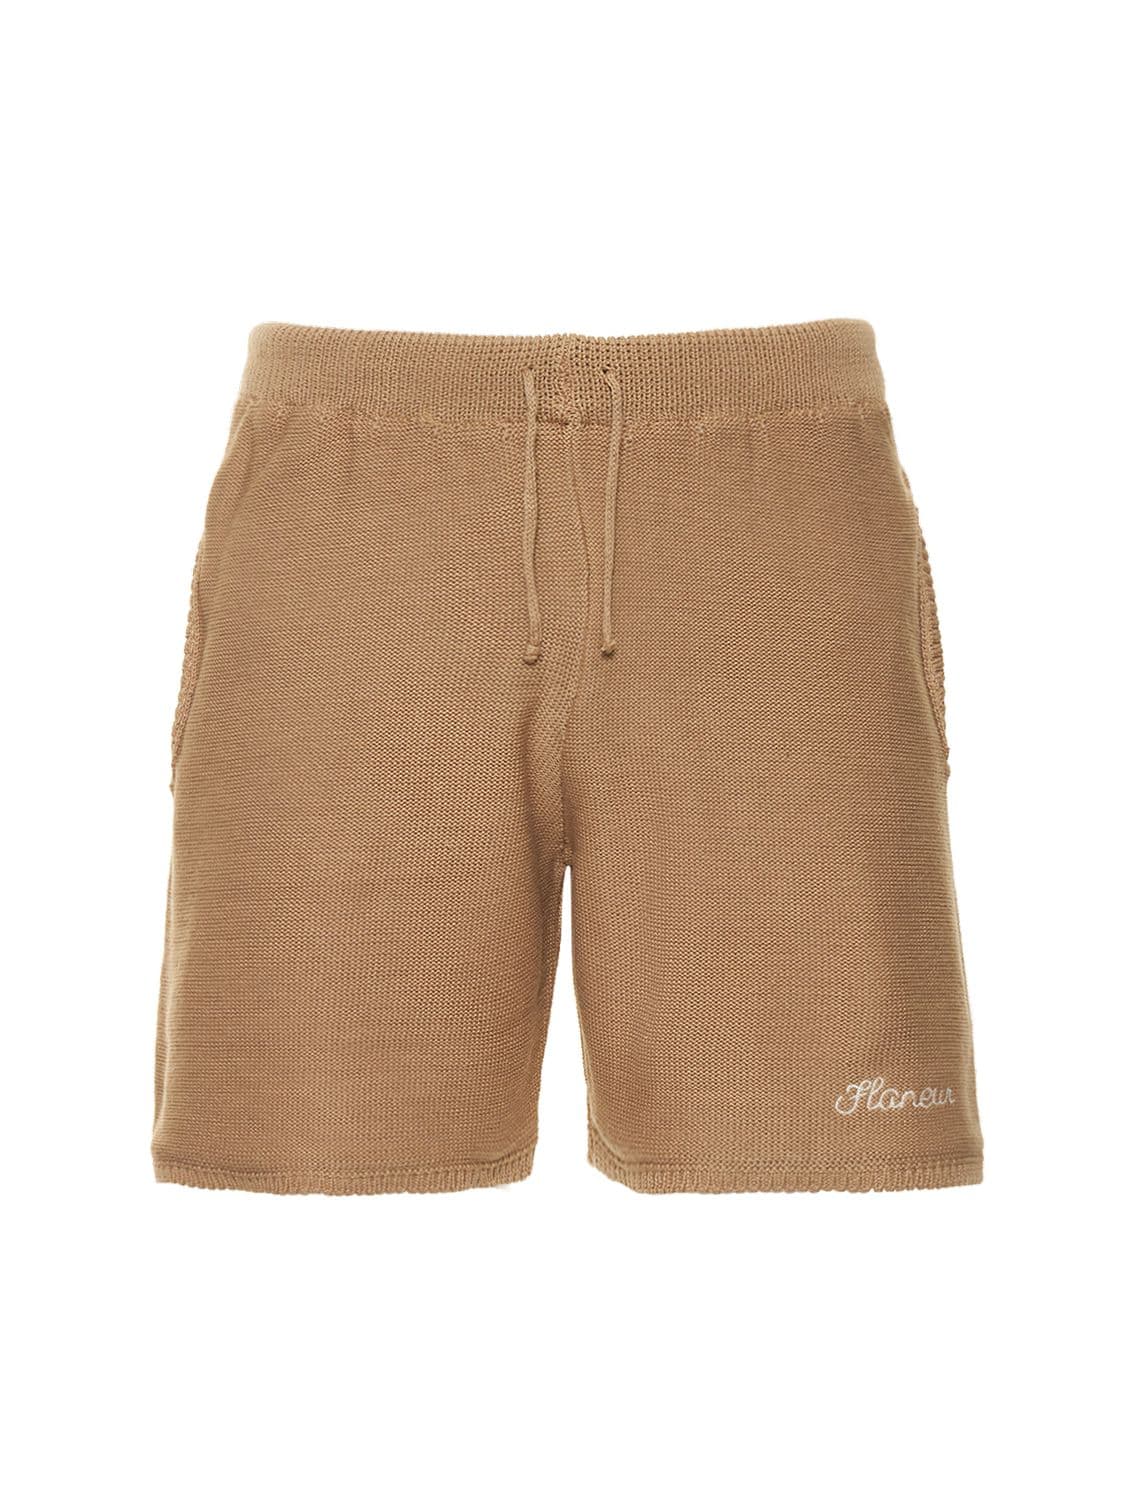 FLANEUR HOMME Cotton Blend Knitted Shorts